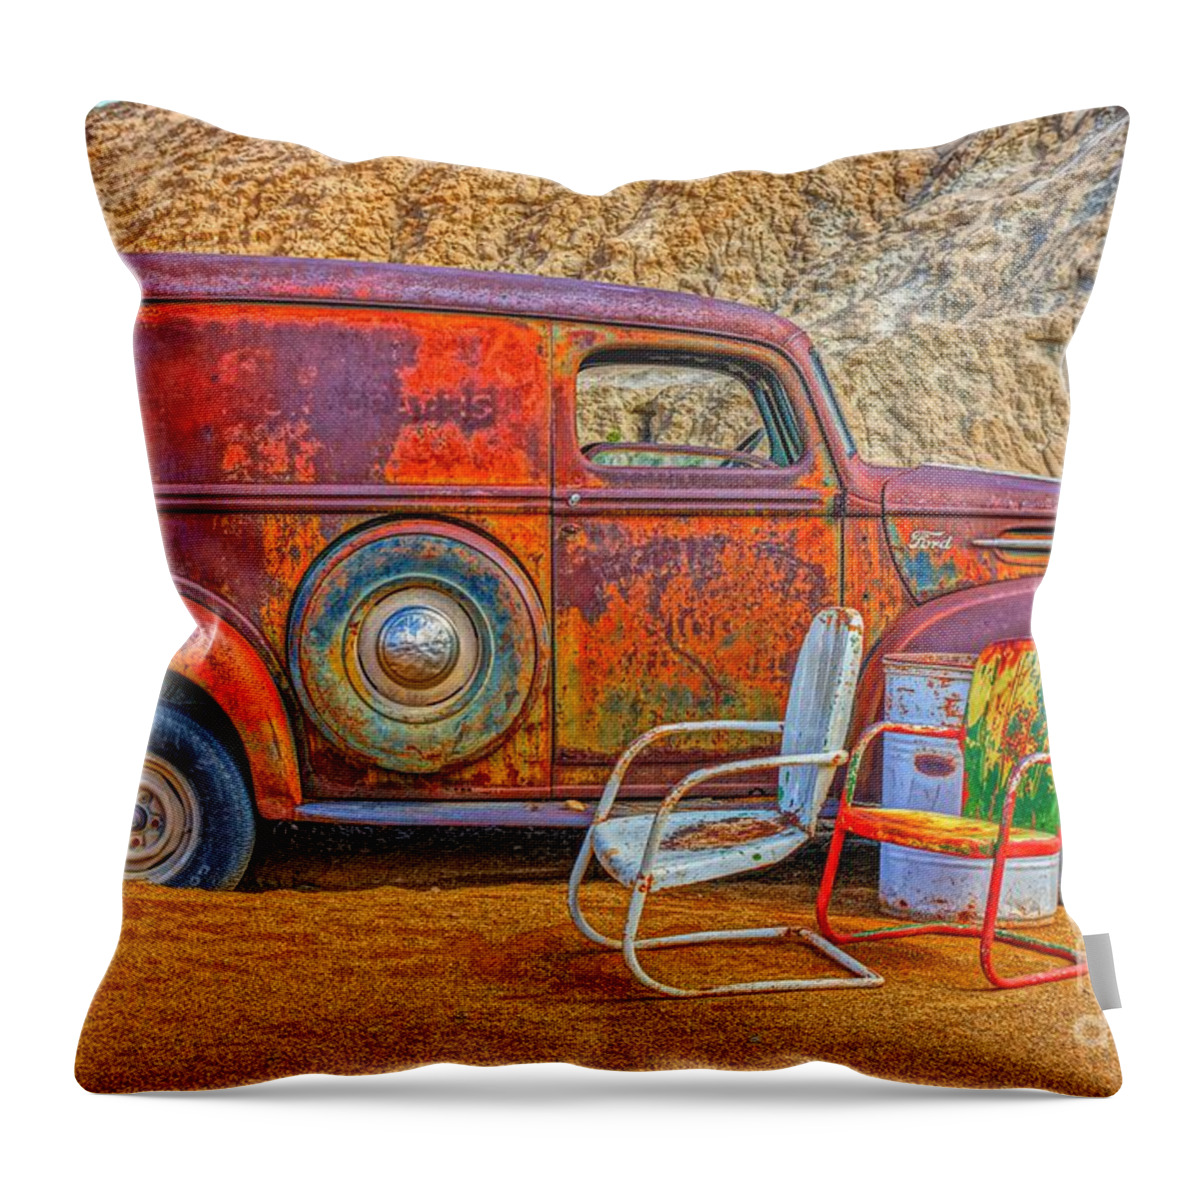  Throw Pillow featuring the photograph Where We Stop Along The Way by Rodney Lee Williams